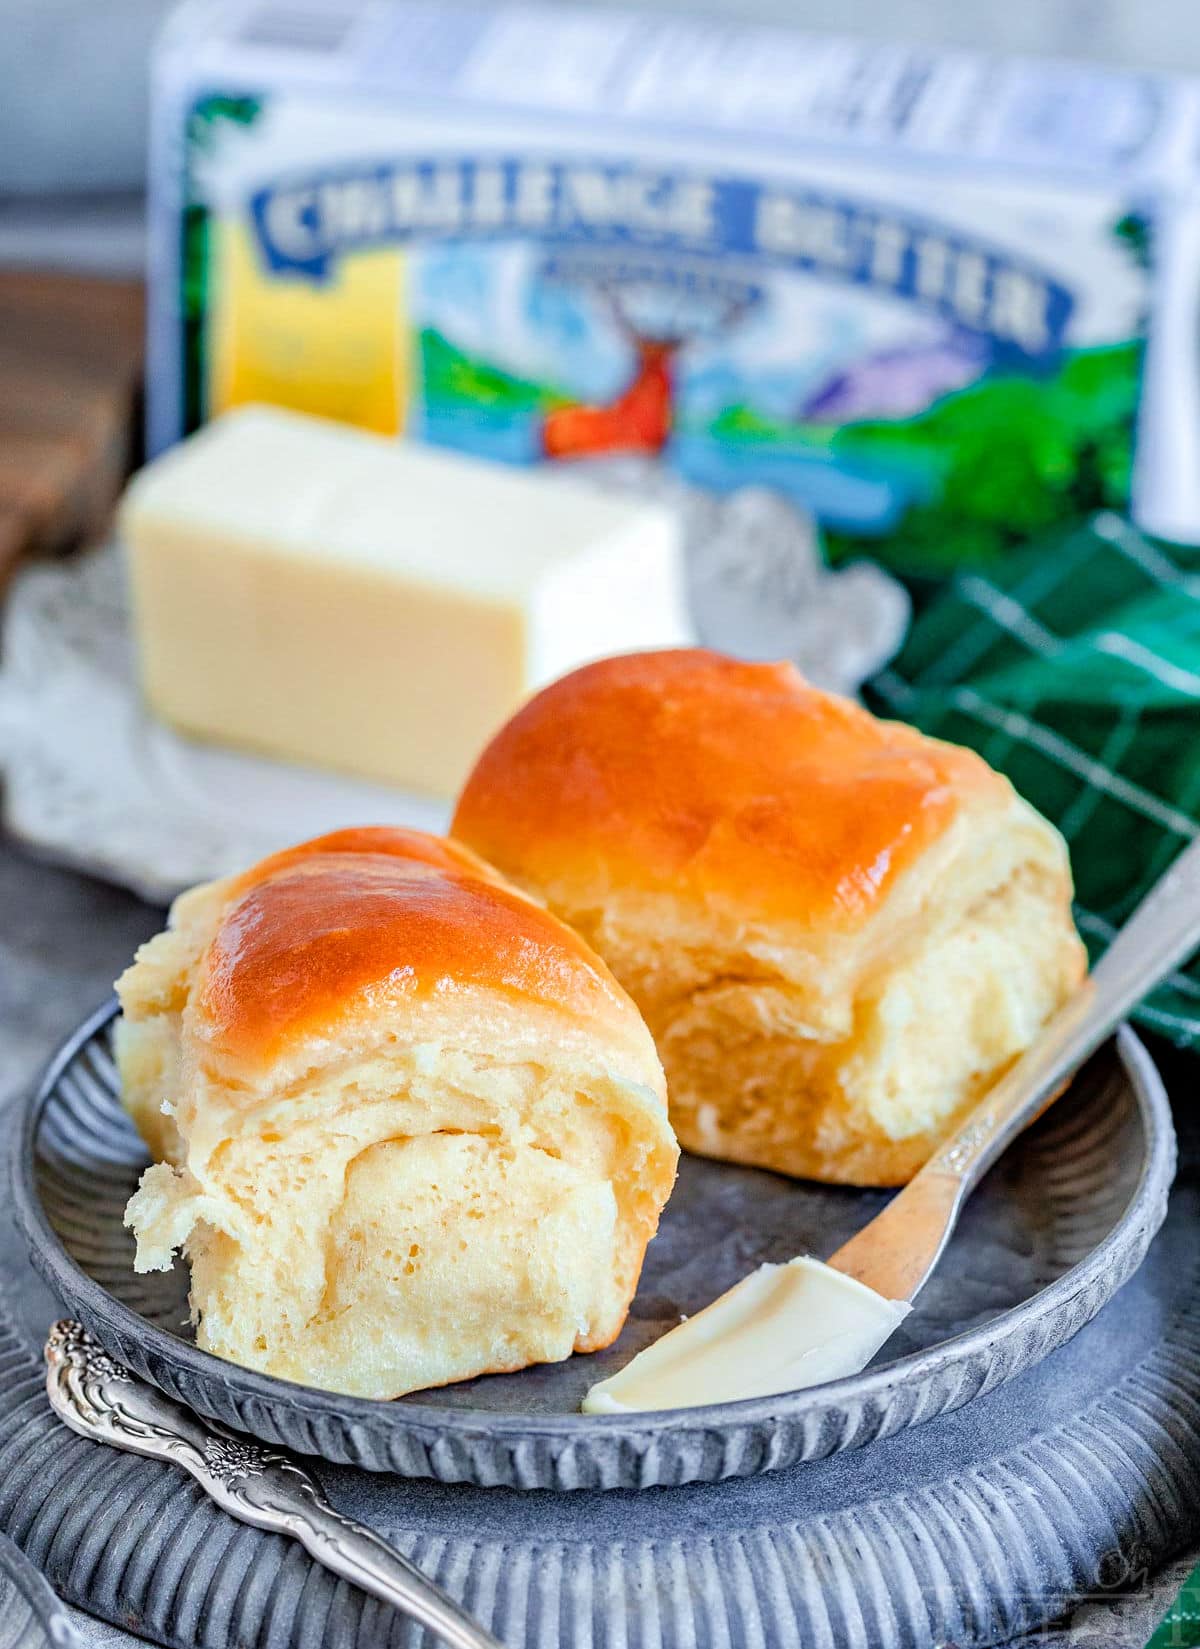 two parker house dinner rolls on a metal plate with a stick of butter behind them. a box of butter can be seen in the background.